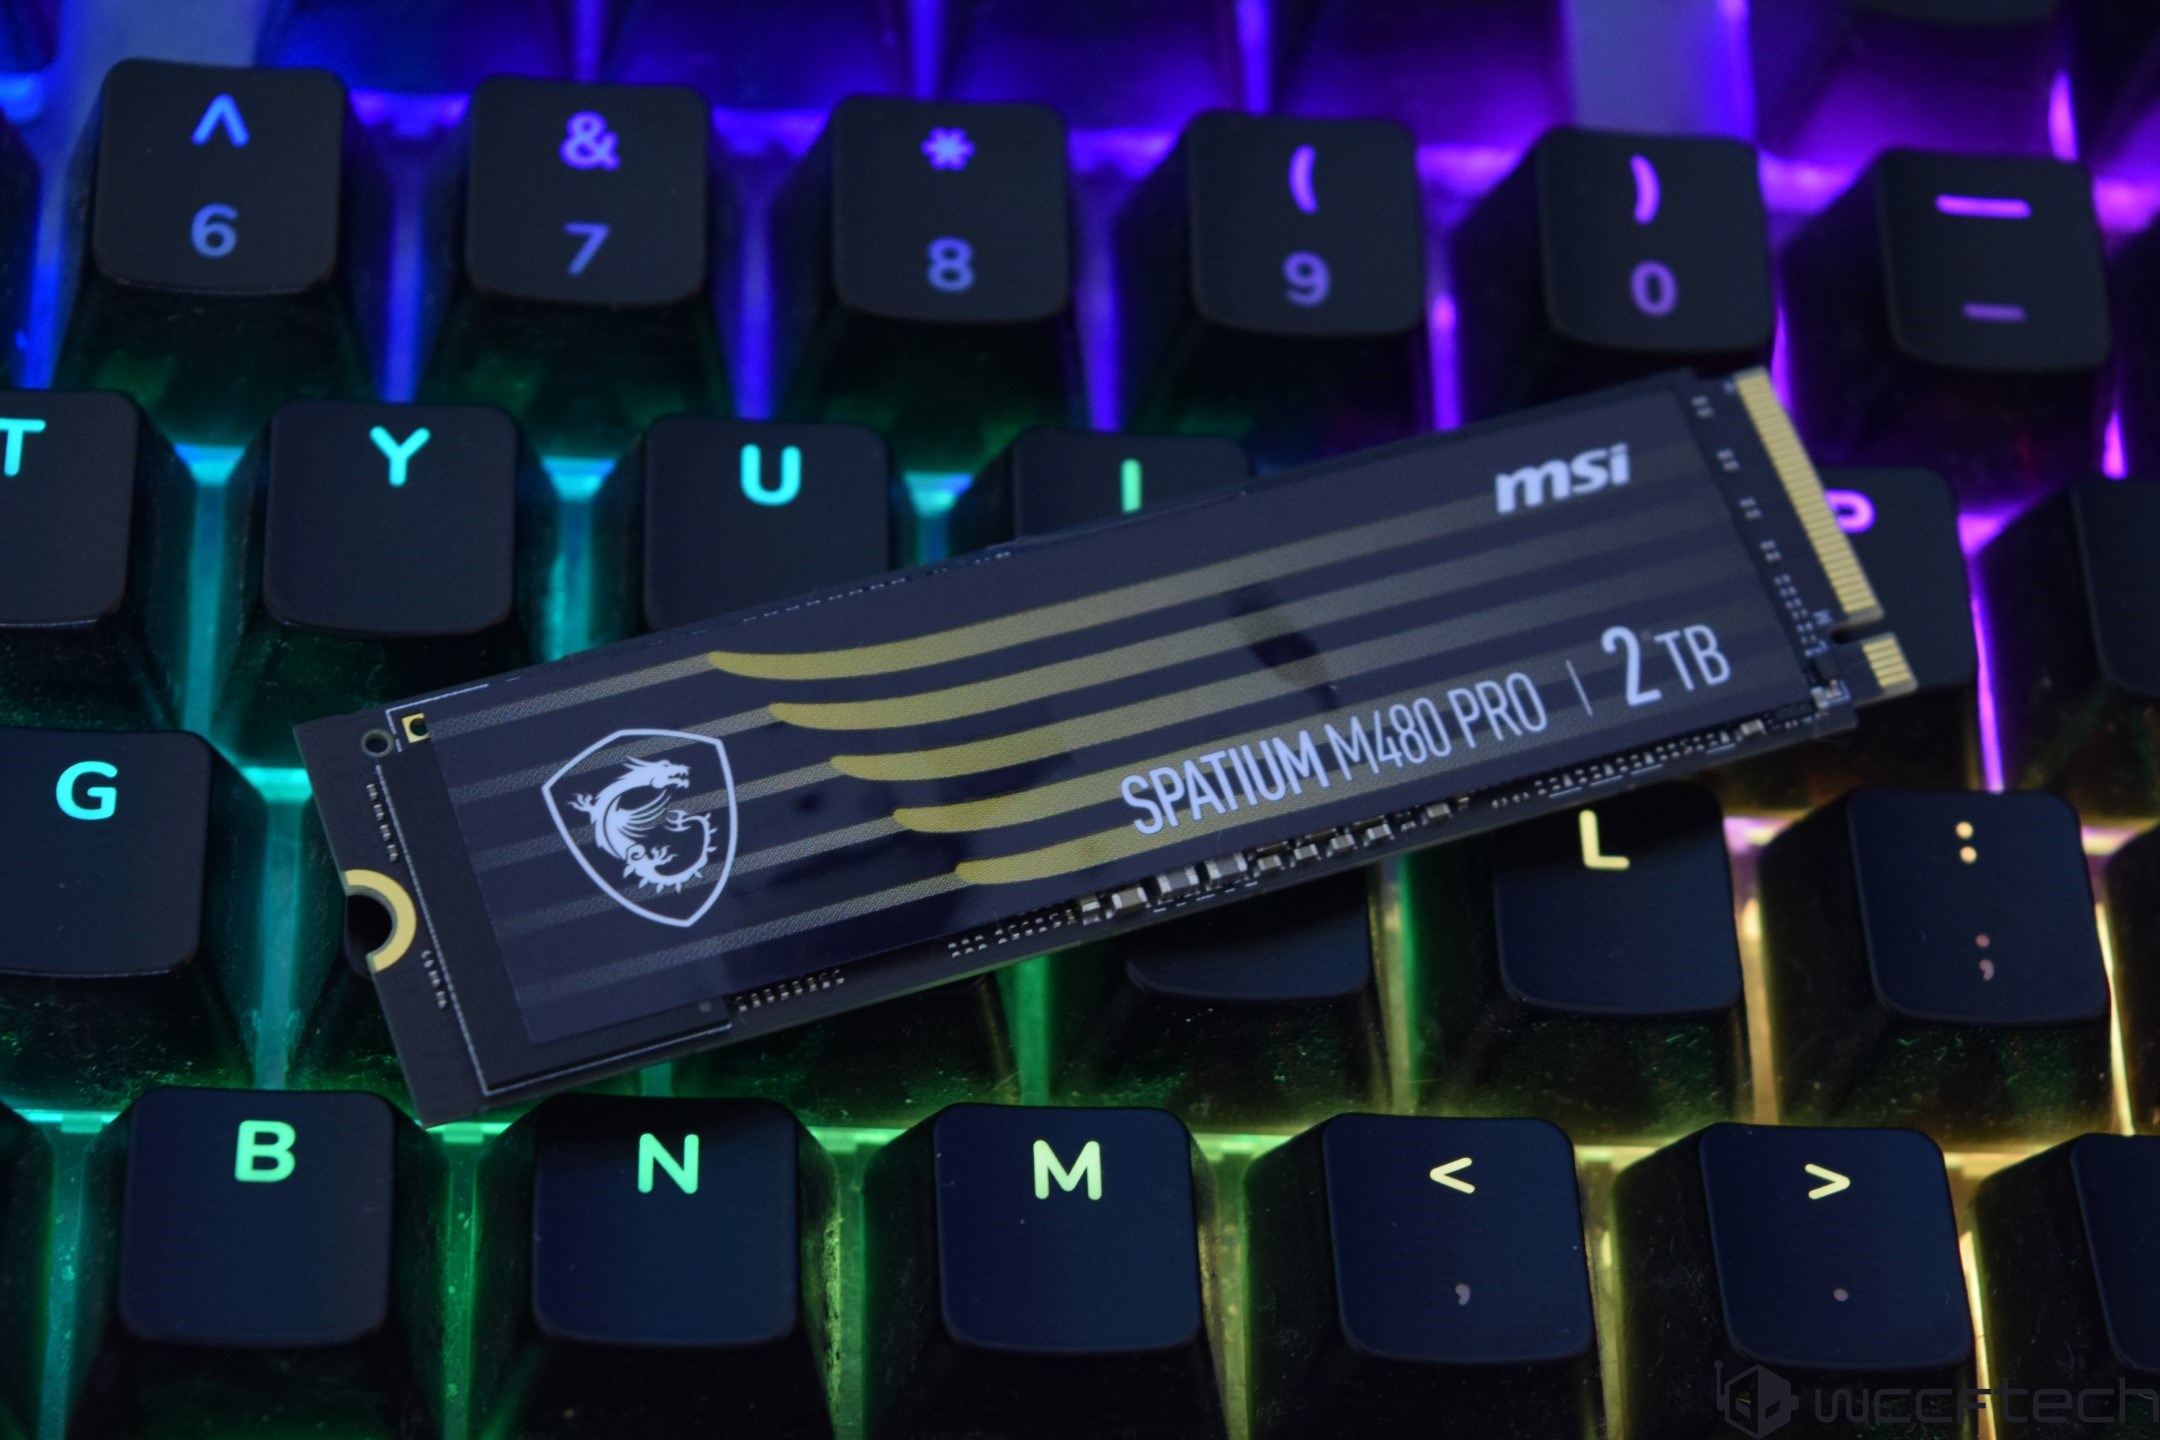 MSI SPATIUM M480 PRO 2 TB PCIe 4.0 NVMe SSD Review - Maxing Out Phison